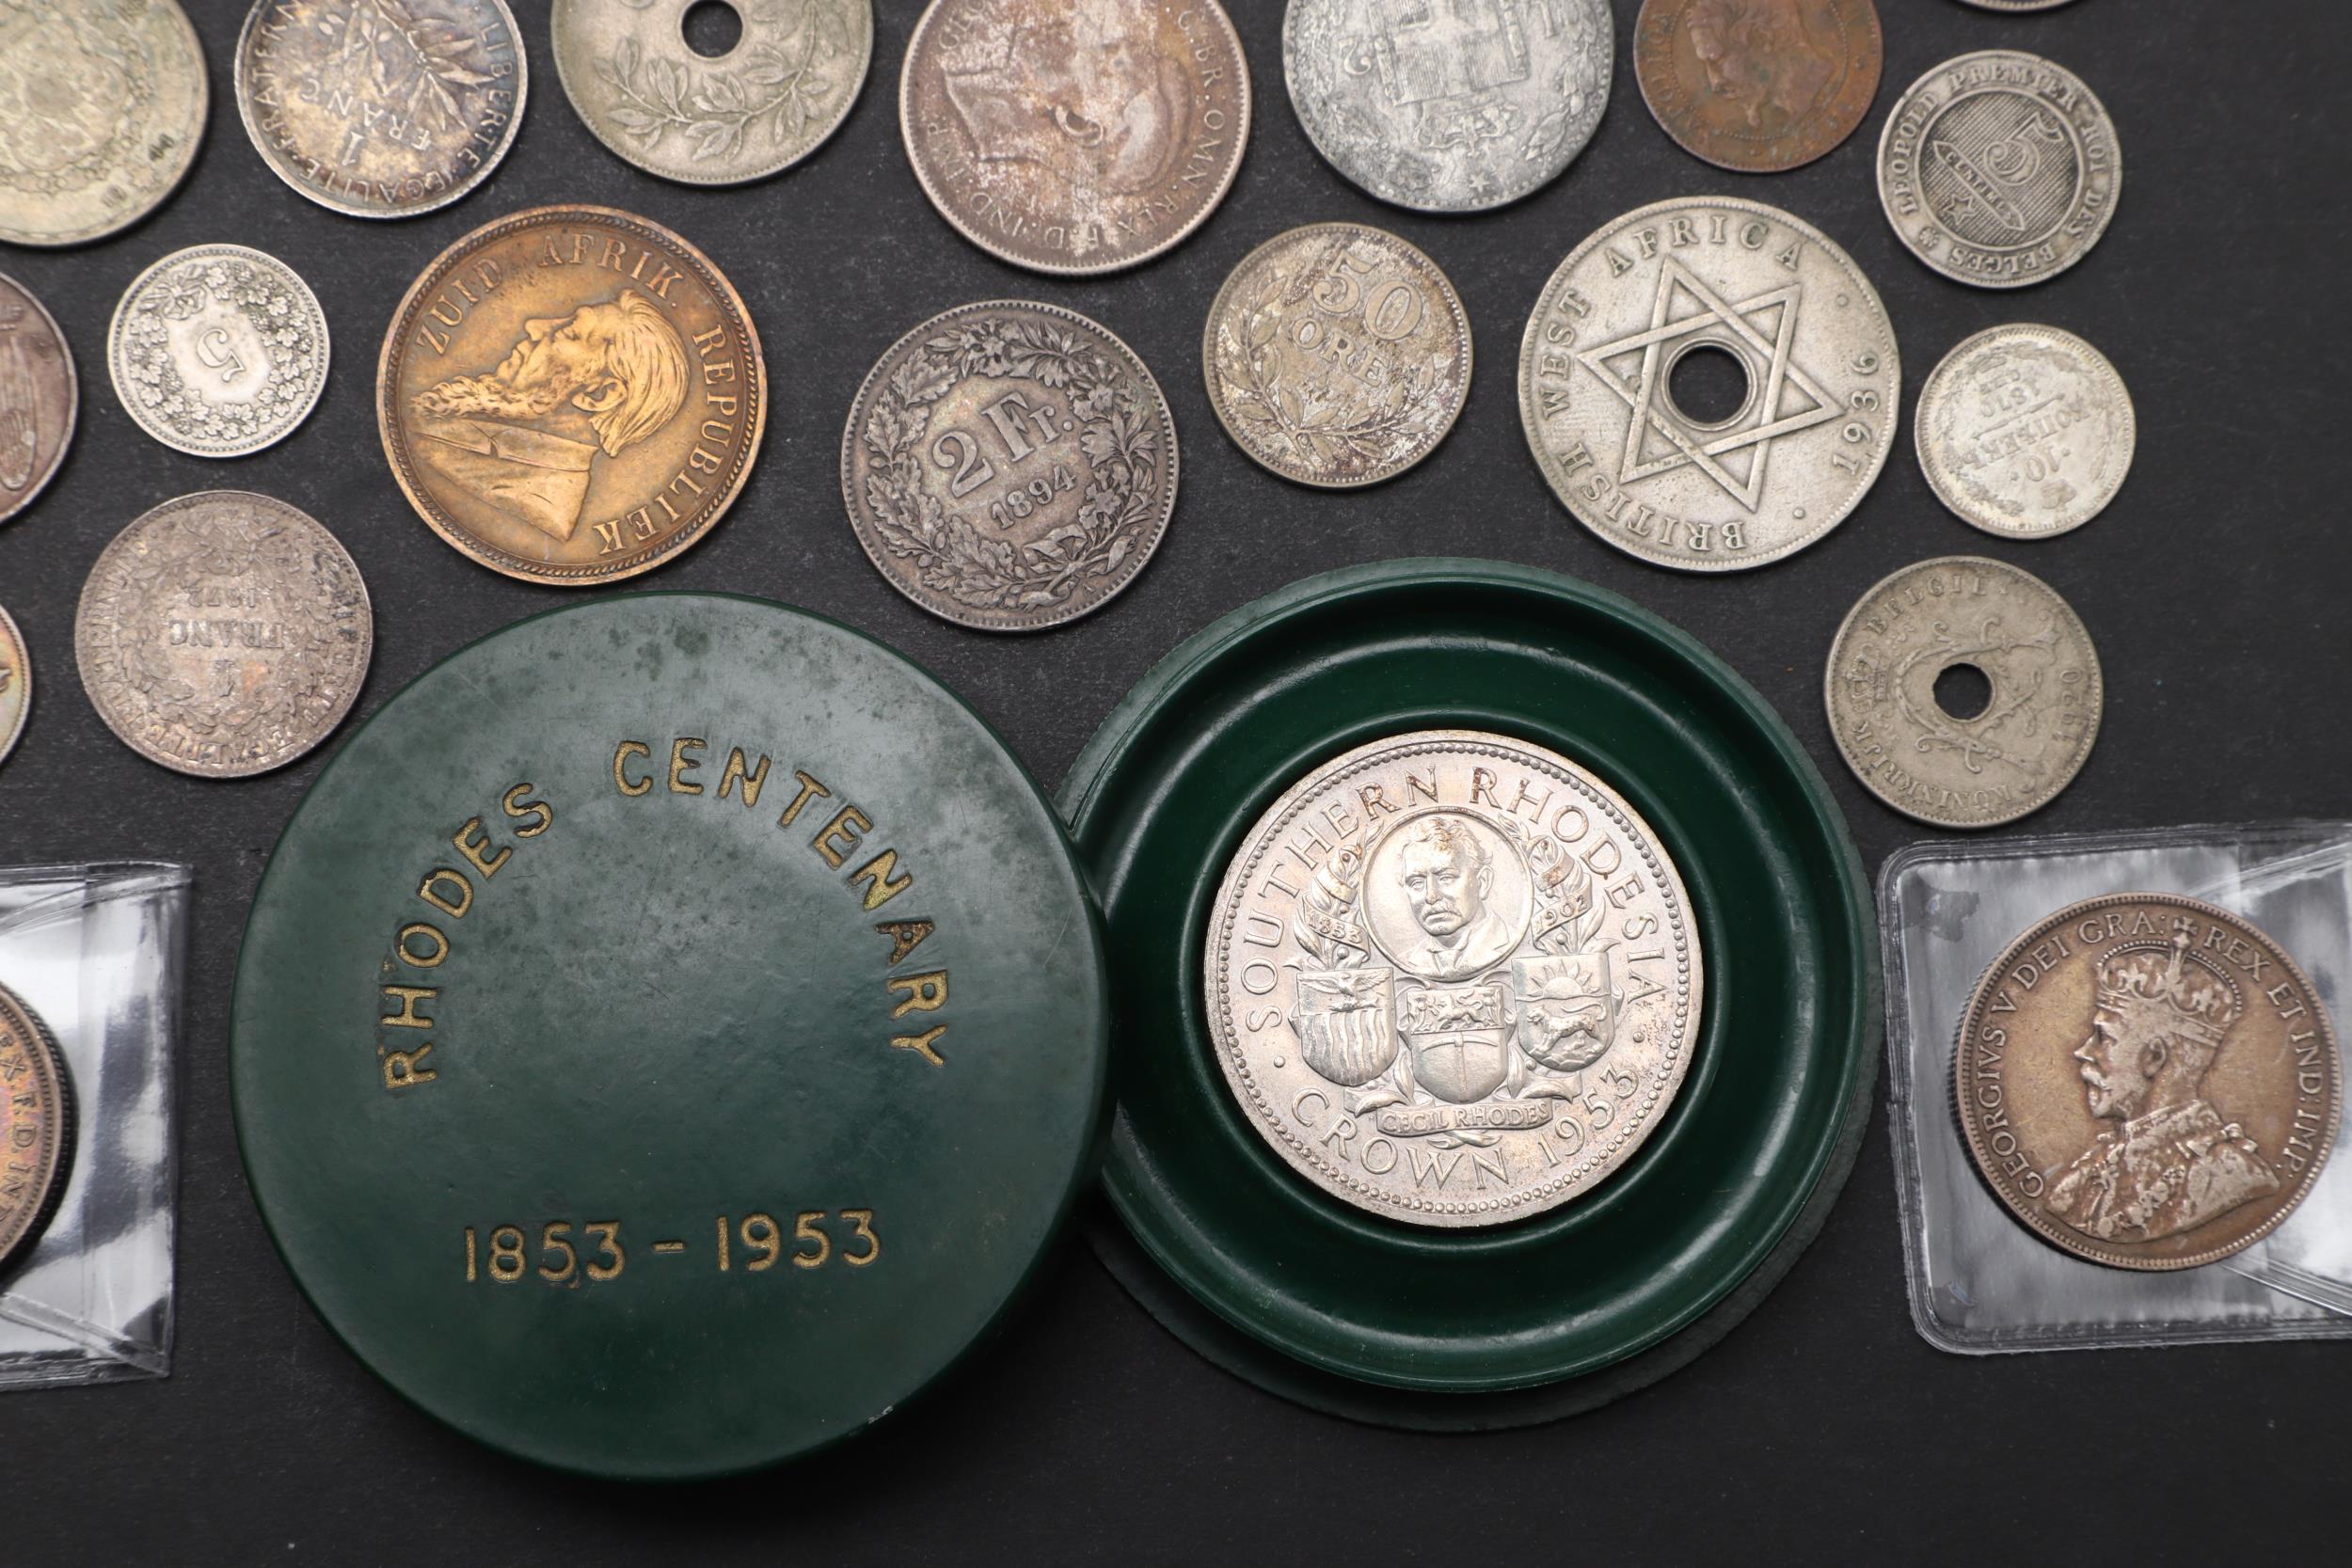 AN INTERESTING COLLECTION OF SOUTH AFRICAN AND OTHER WORLD COINS. - Image 4 of 7